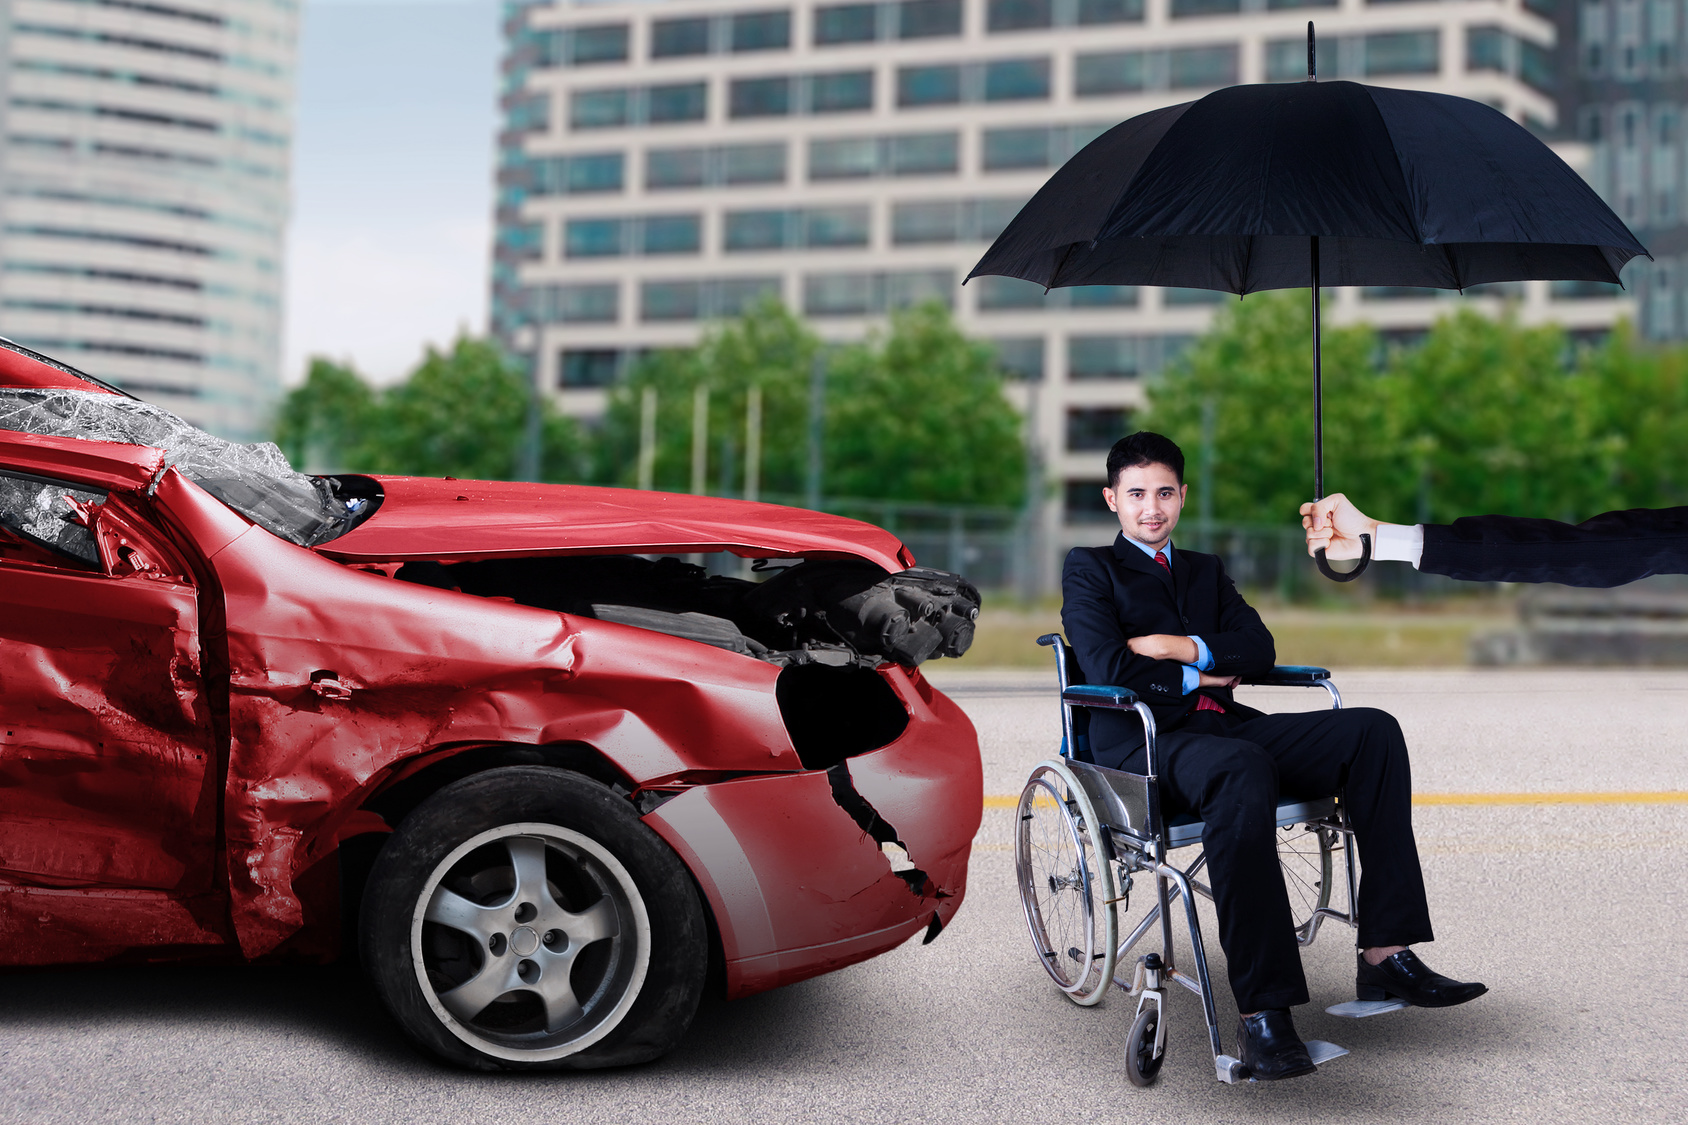 What is personal injury protection and what does it cover